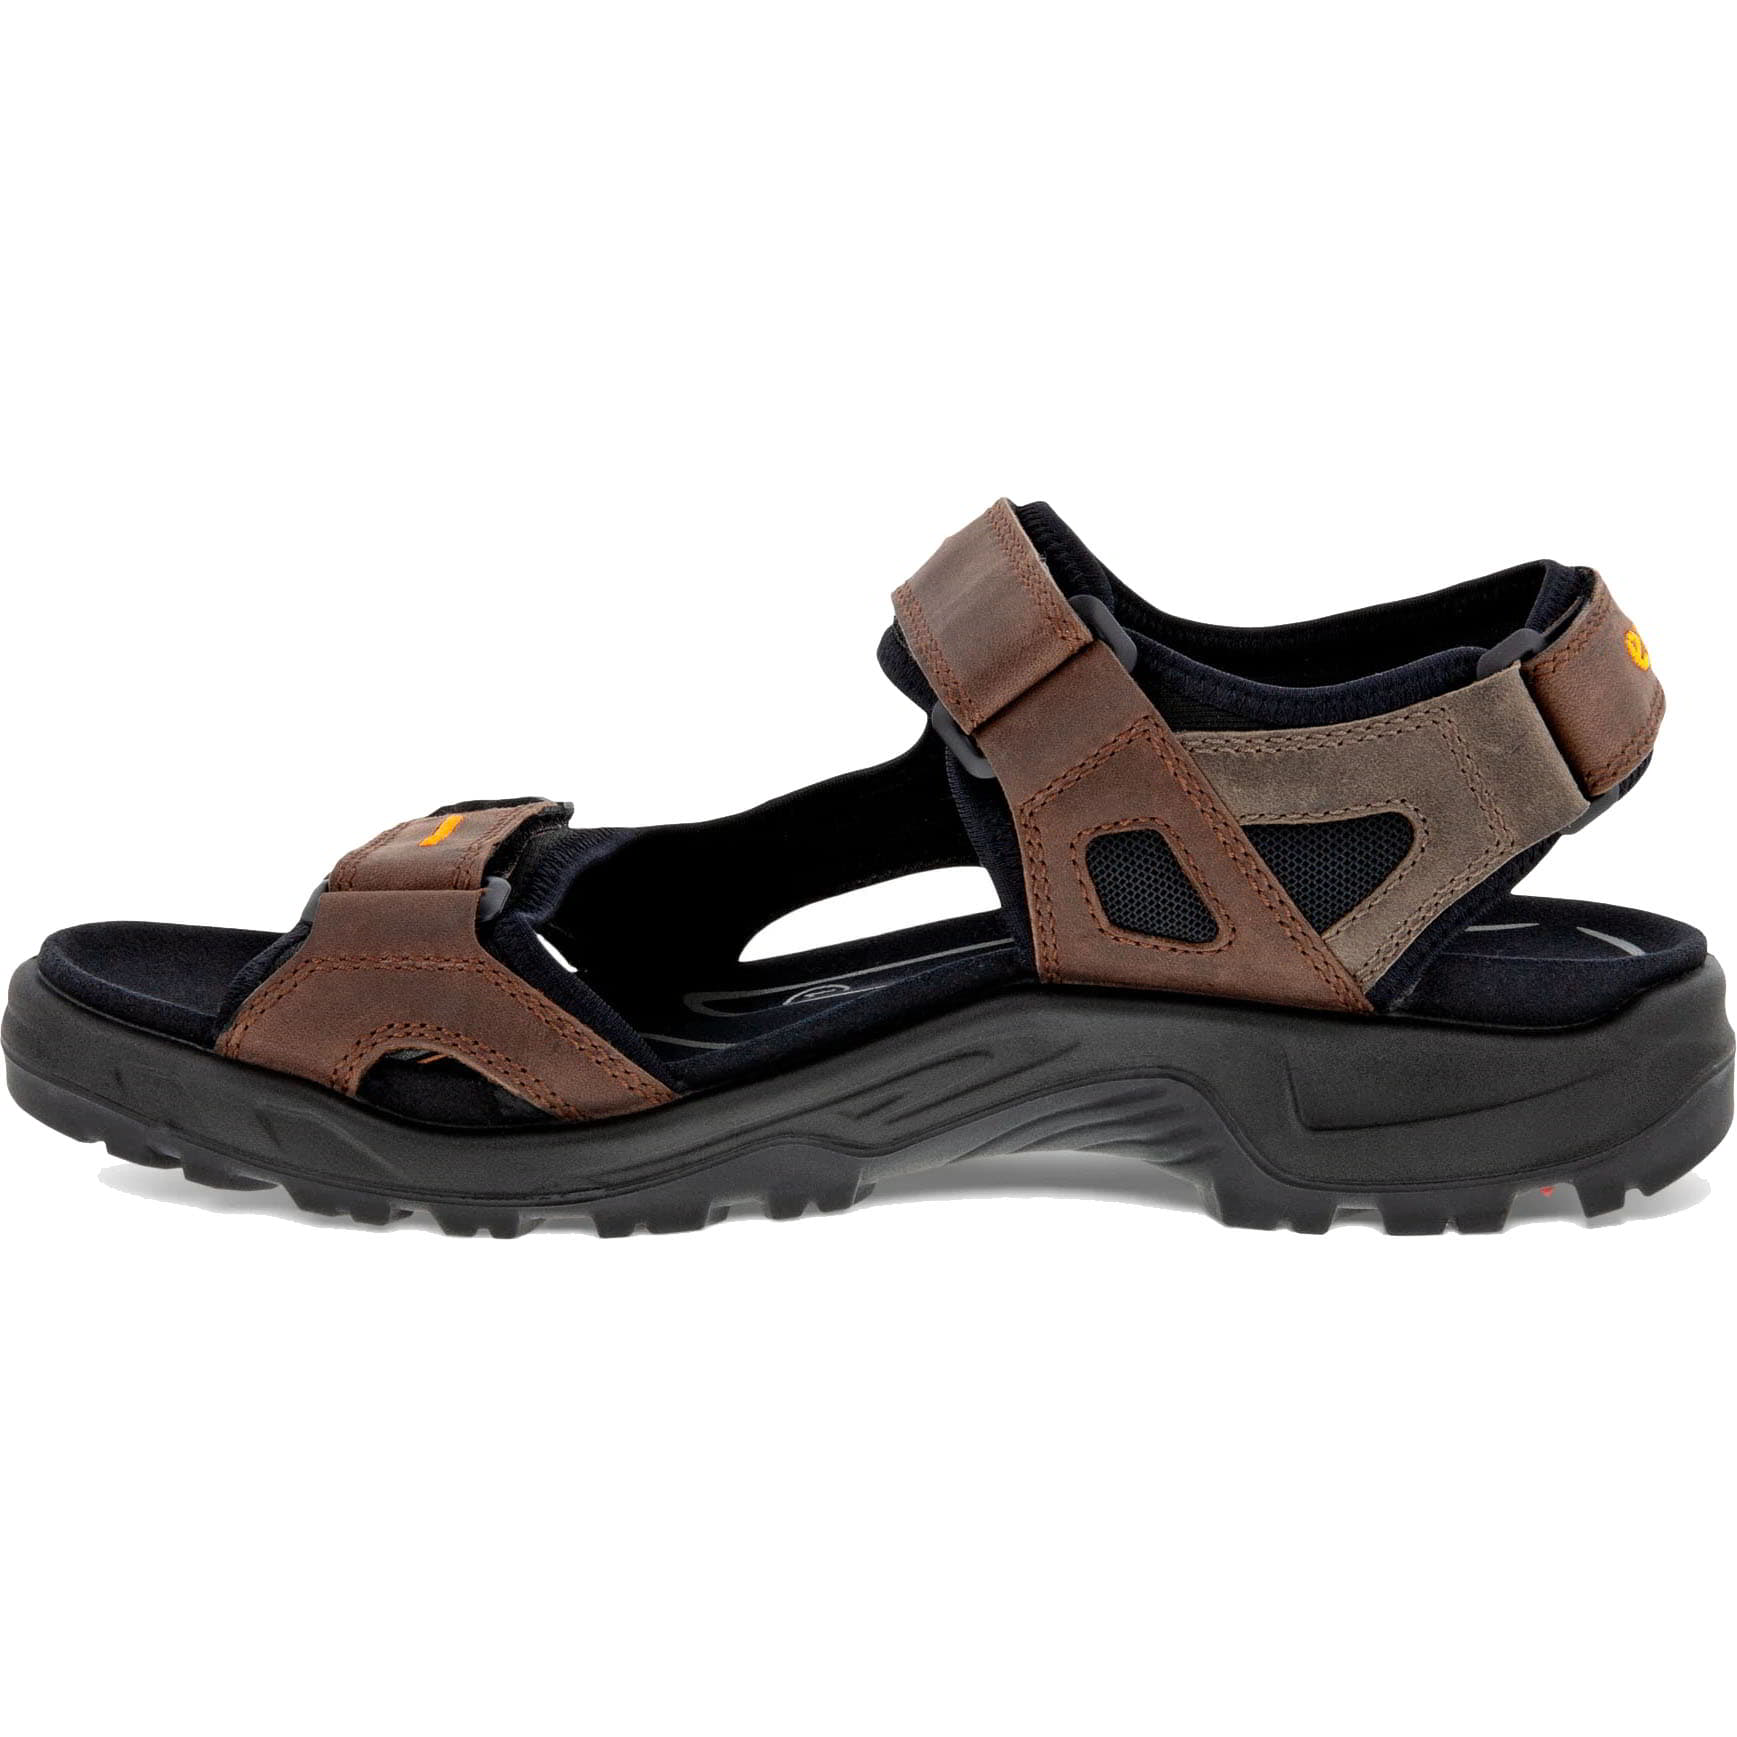 Ecco Shoes Mens Offroad Leather Walking Sandals - UK 9/9.5 / EU 43 Brown 2951